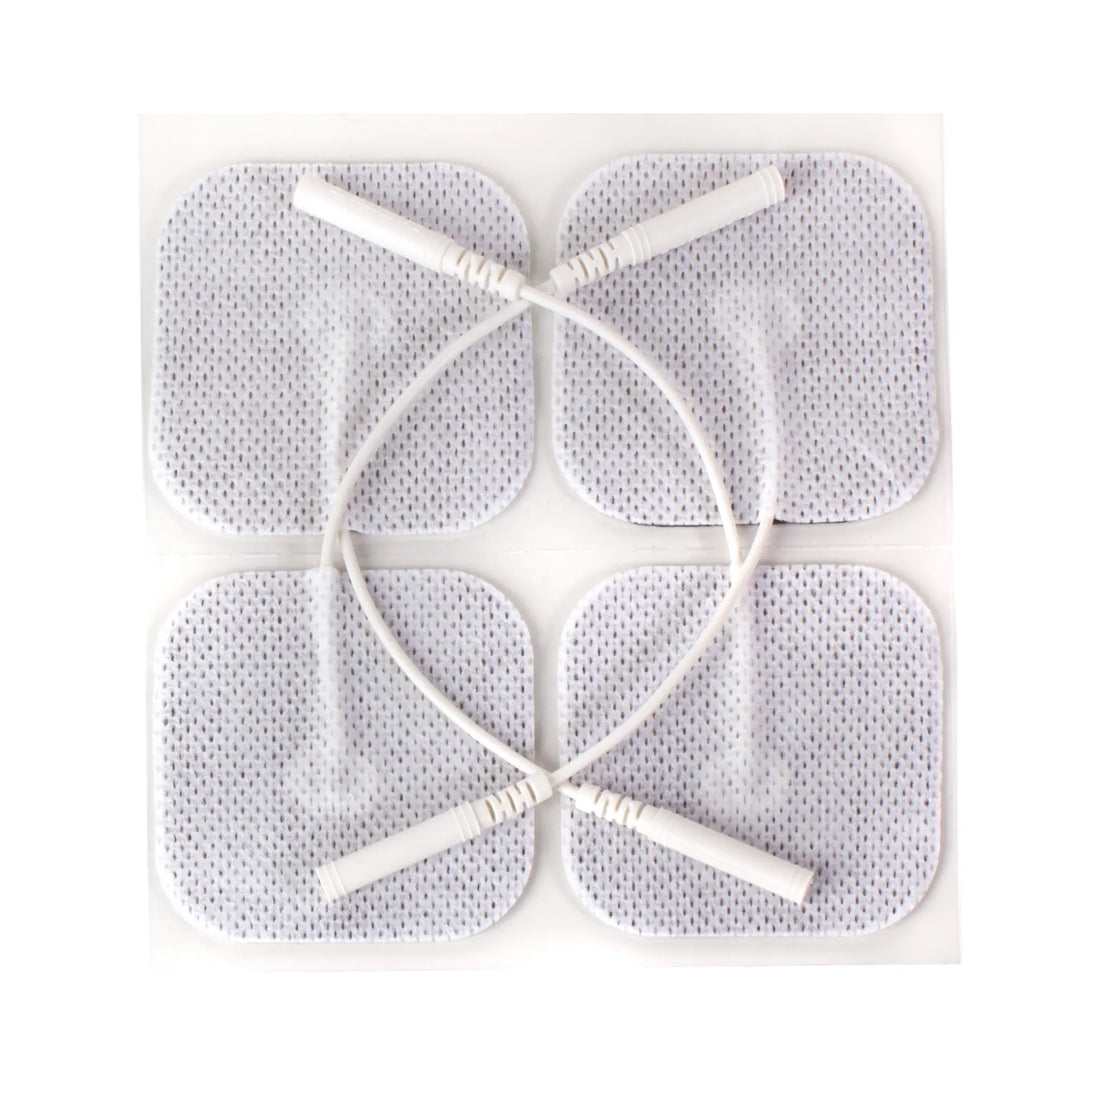 clinical grade conductive pads 